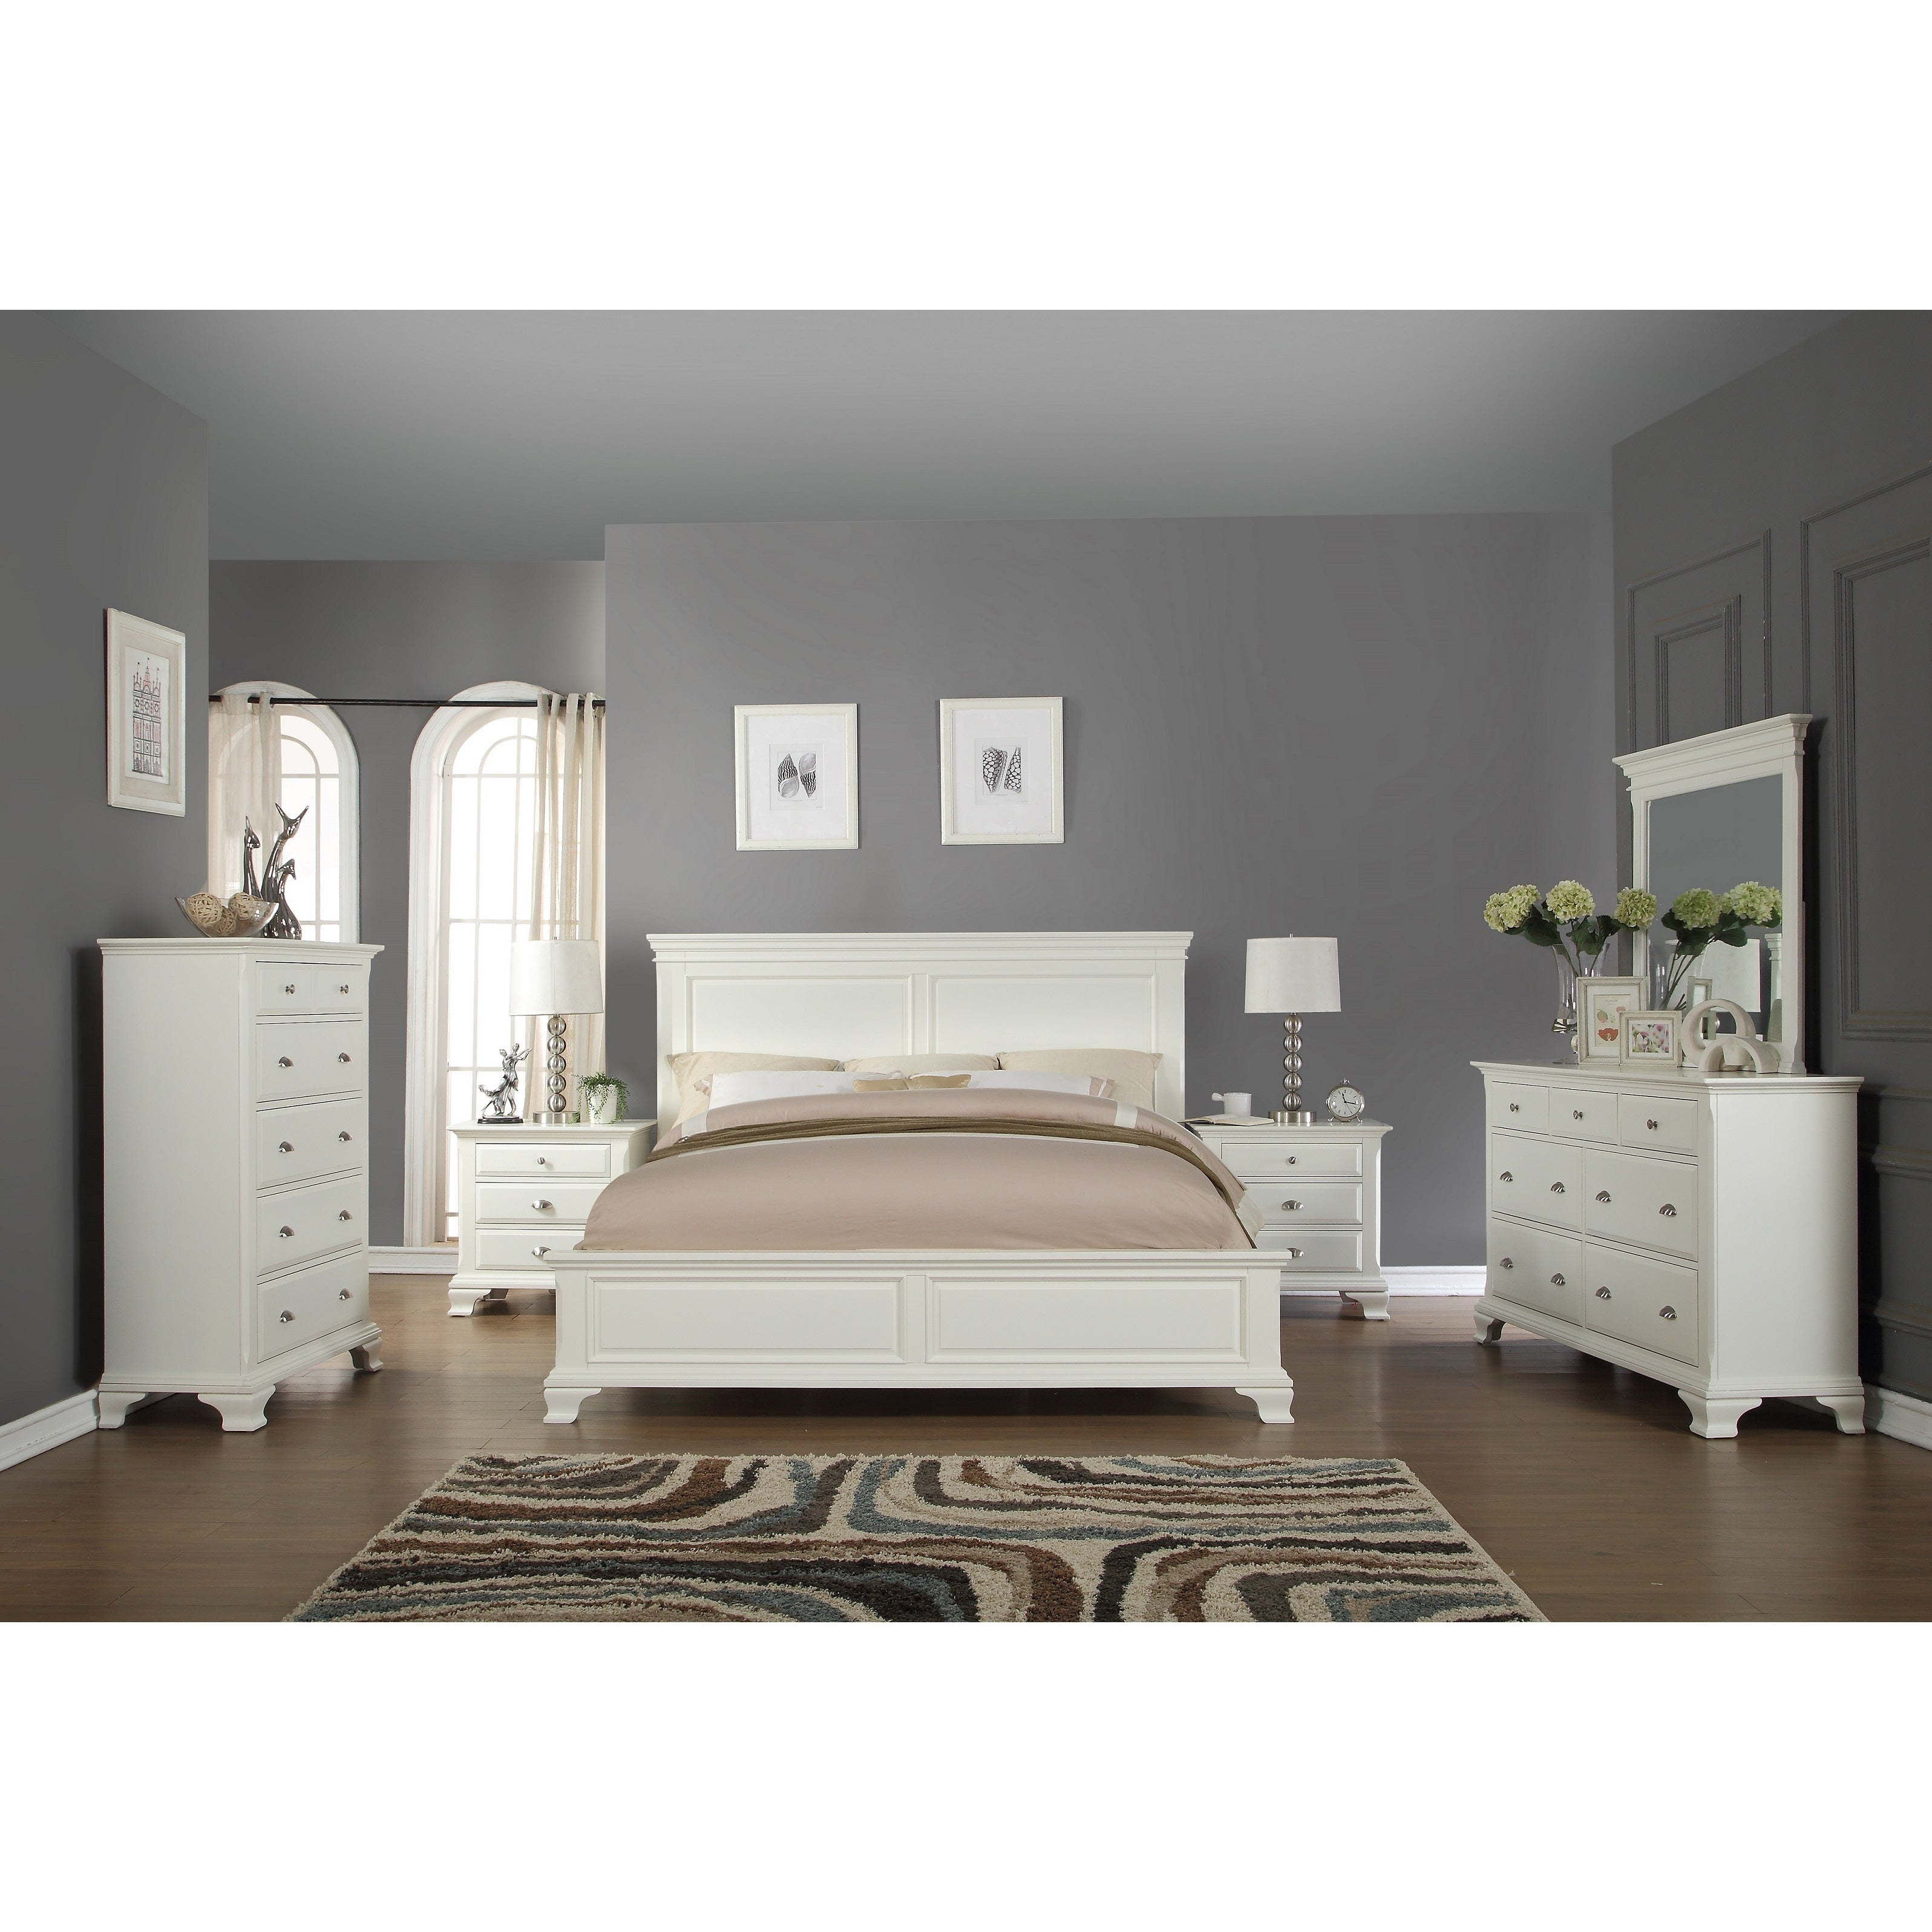 Laveno 012 White Wood Bedroom Furniture Set Includes King Bed Dresser Mirror 2 Night Stands And Chest within size 3193 X 3193